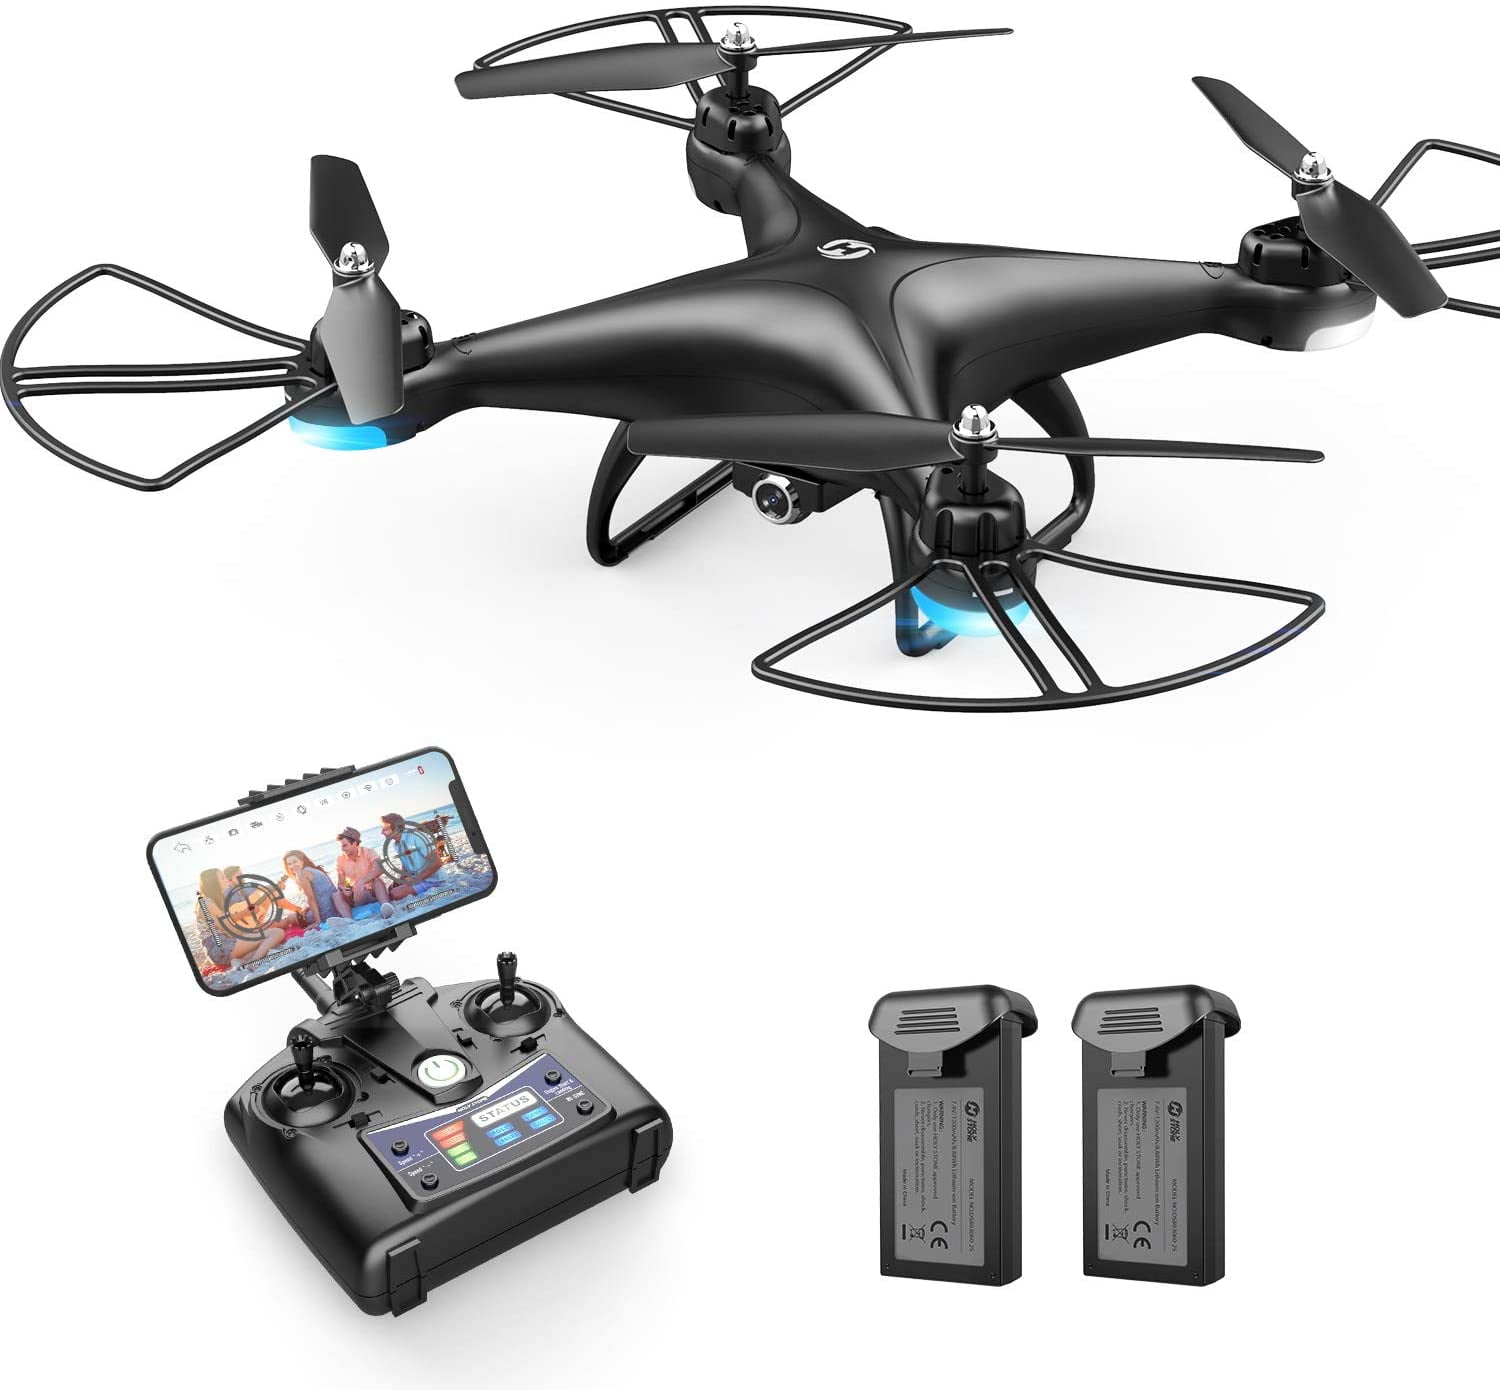 RC Quadcopter Toy Gift for Birthday Foldable Drone Headless Mode Gesture Photographing WiFi FPV Drone with Camera for Adults Altitude Hold